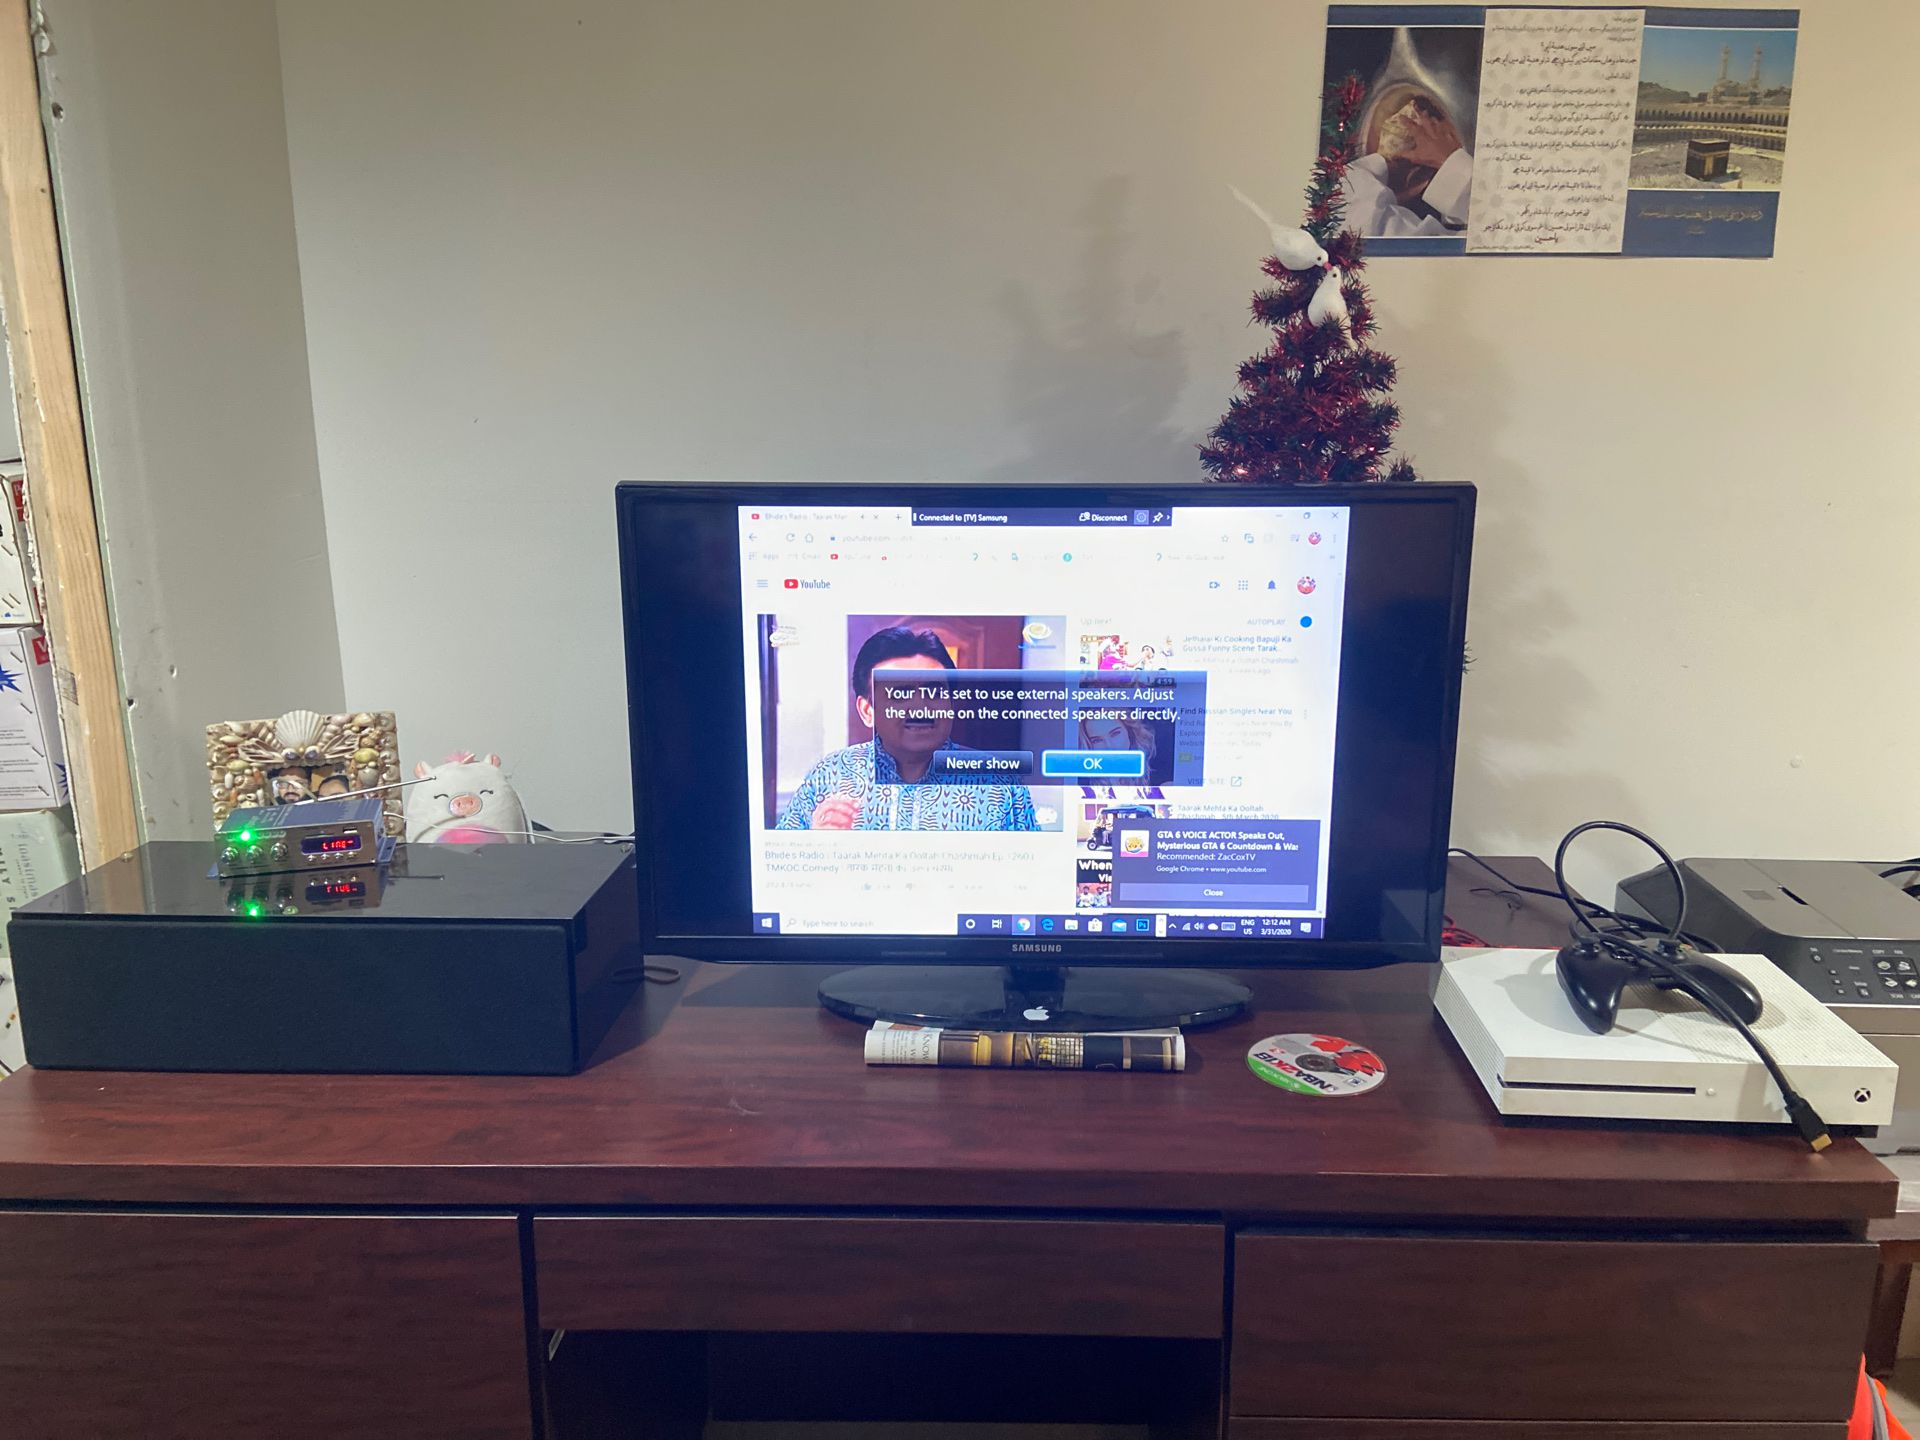 A 32’ inch Samsung Smart TV and a speaker with an amplifier